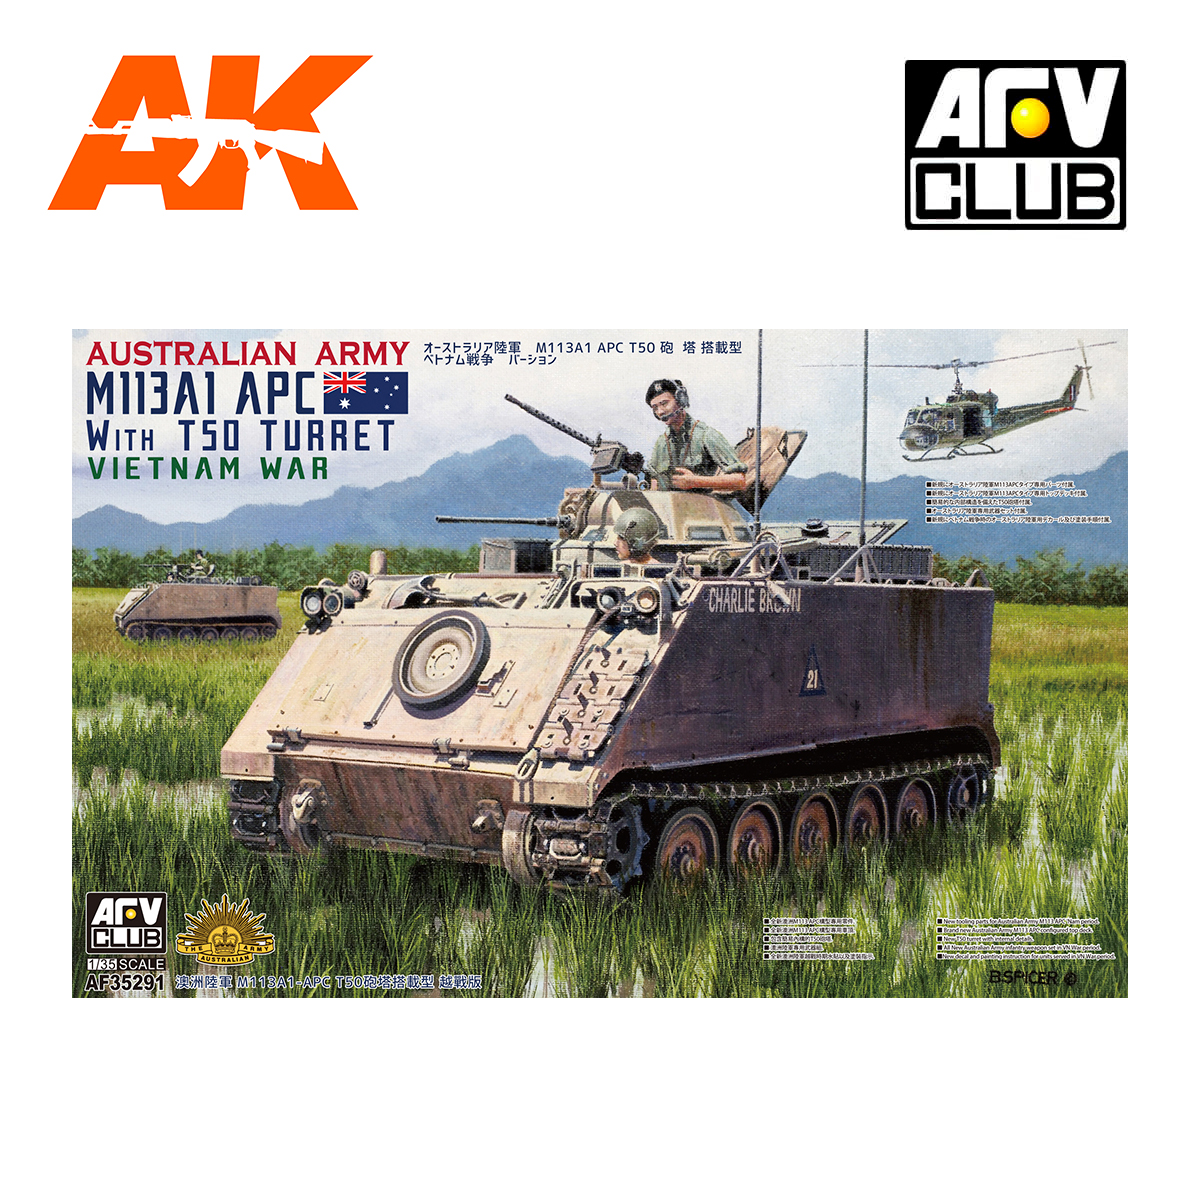 S-Model USA M113A1 Armored Transport Vehicle 1/72 Plastic Tank Pre-builded Model 